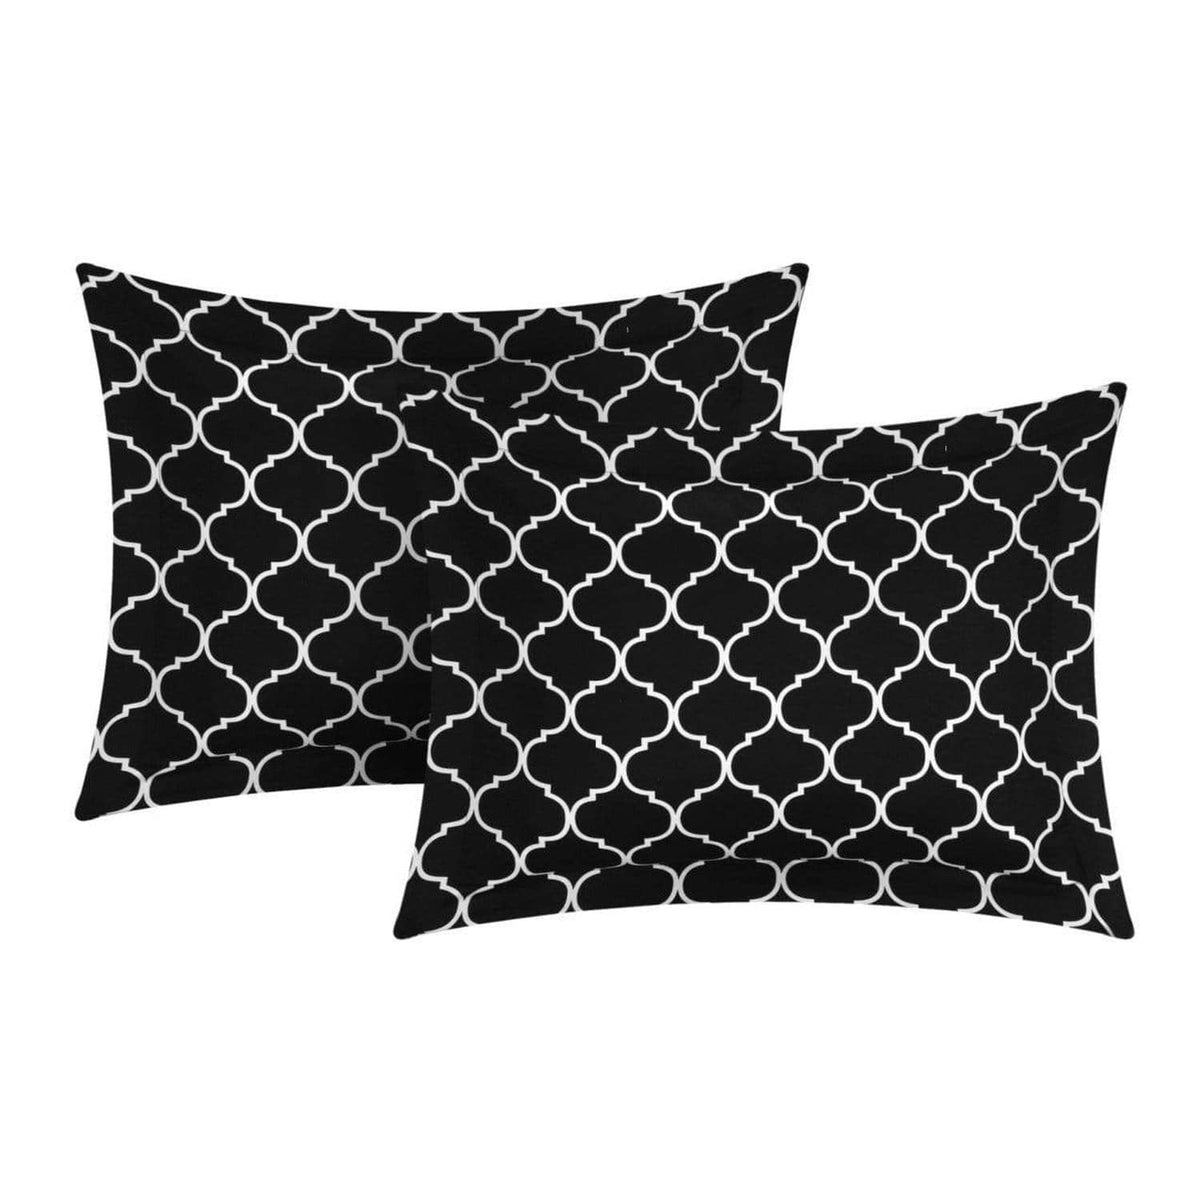 Chic Home Brooklyn 3 Piece Reversible Duvet Cover Set 